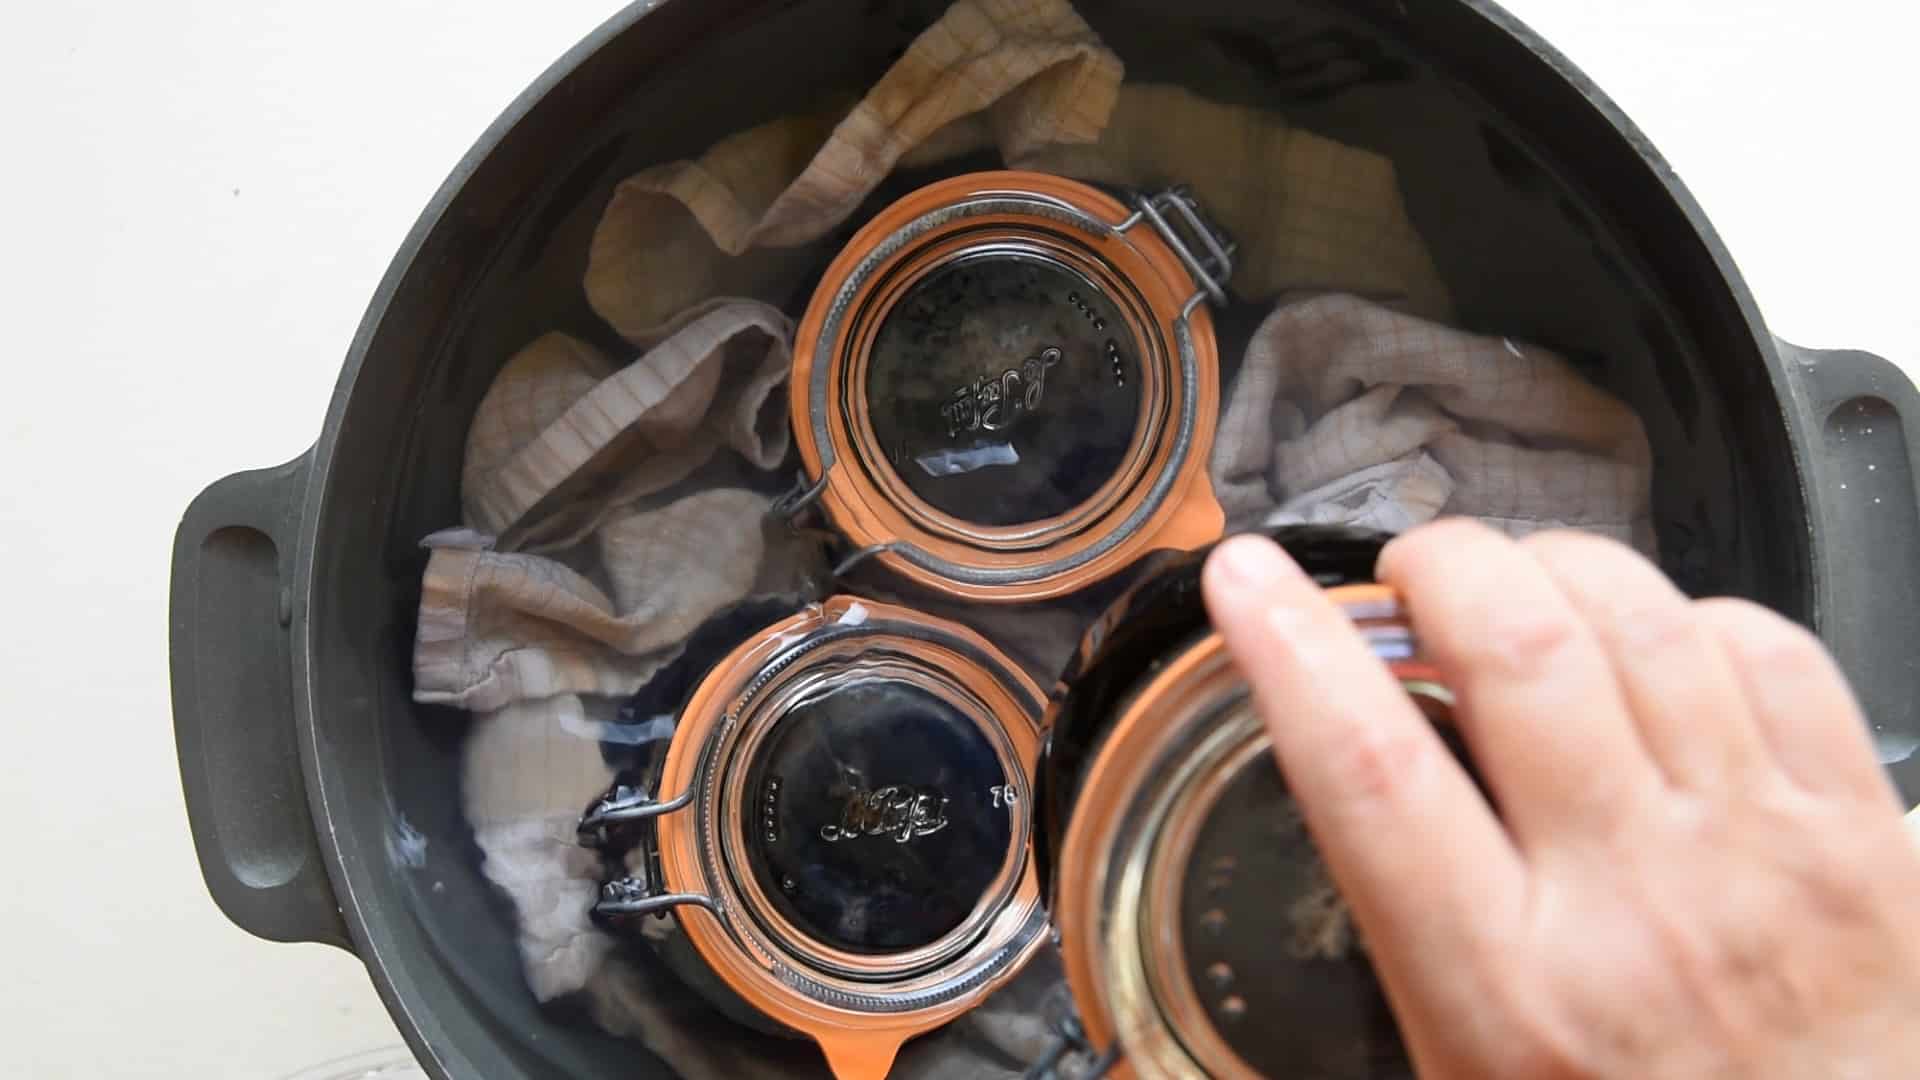 remove the jars from the water once they are cold